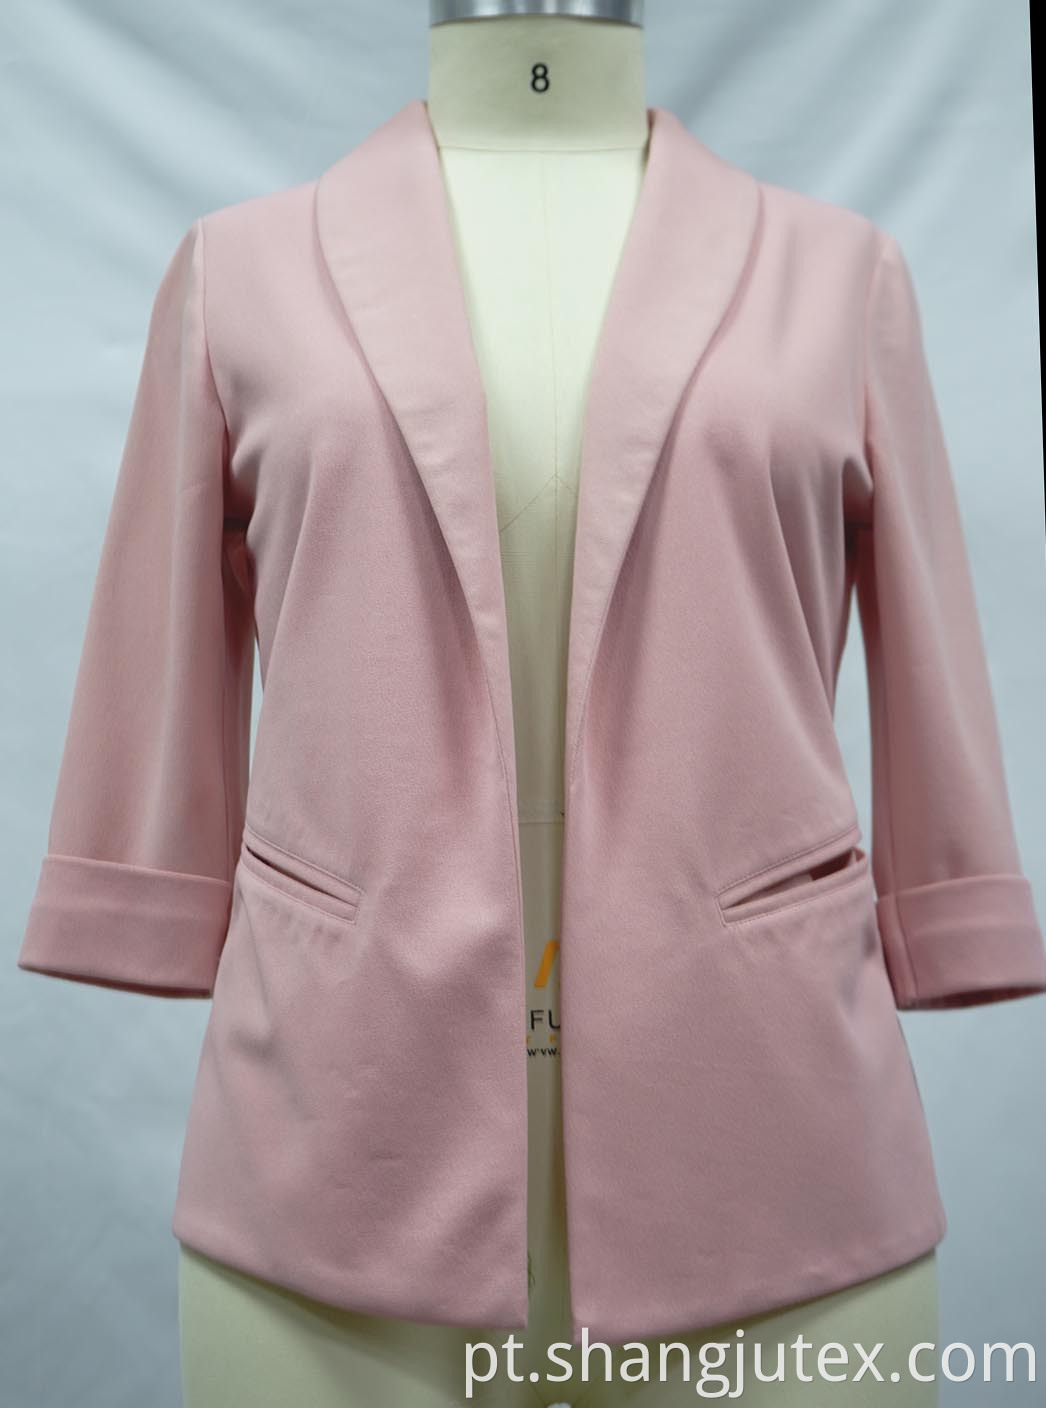 fabric NR knitted of women's jackets